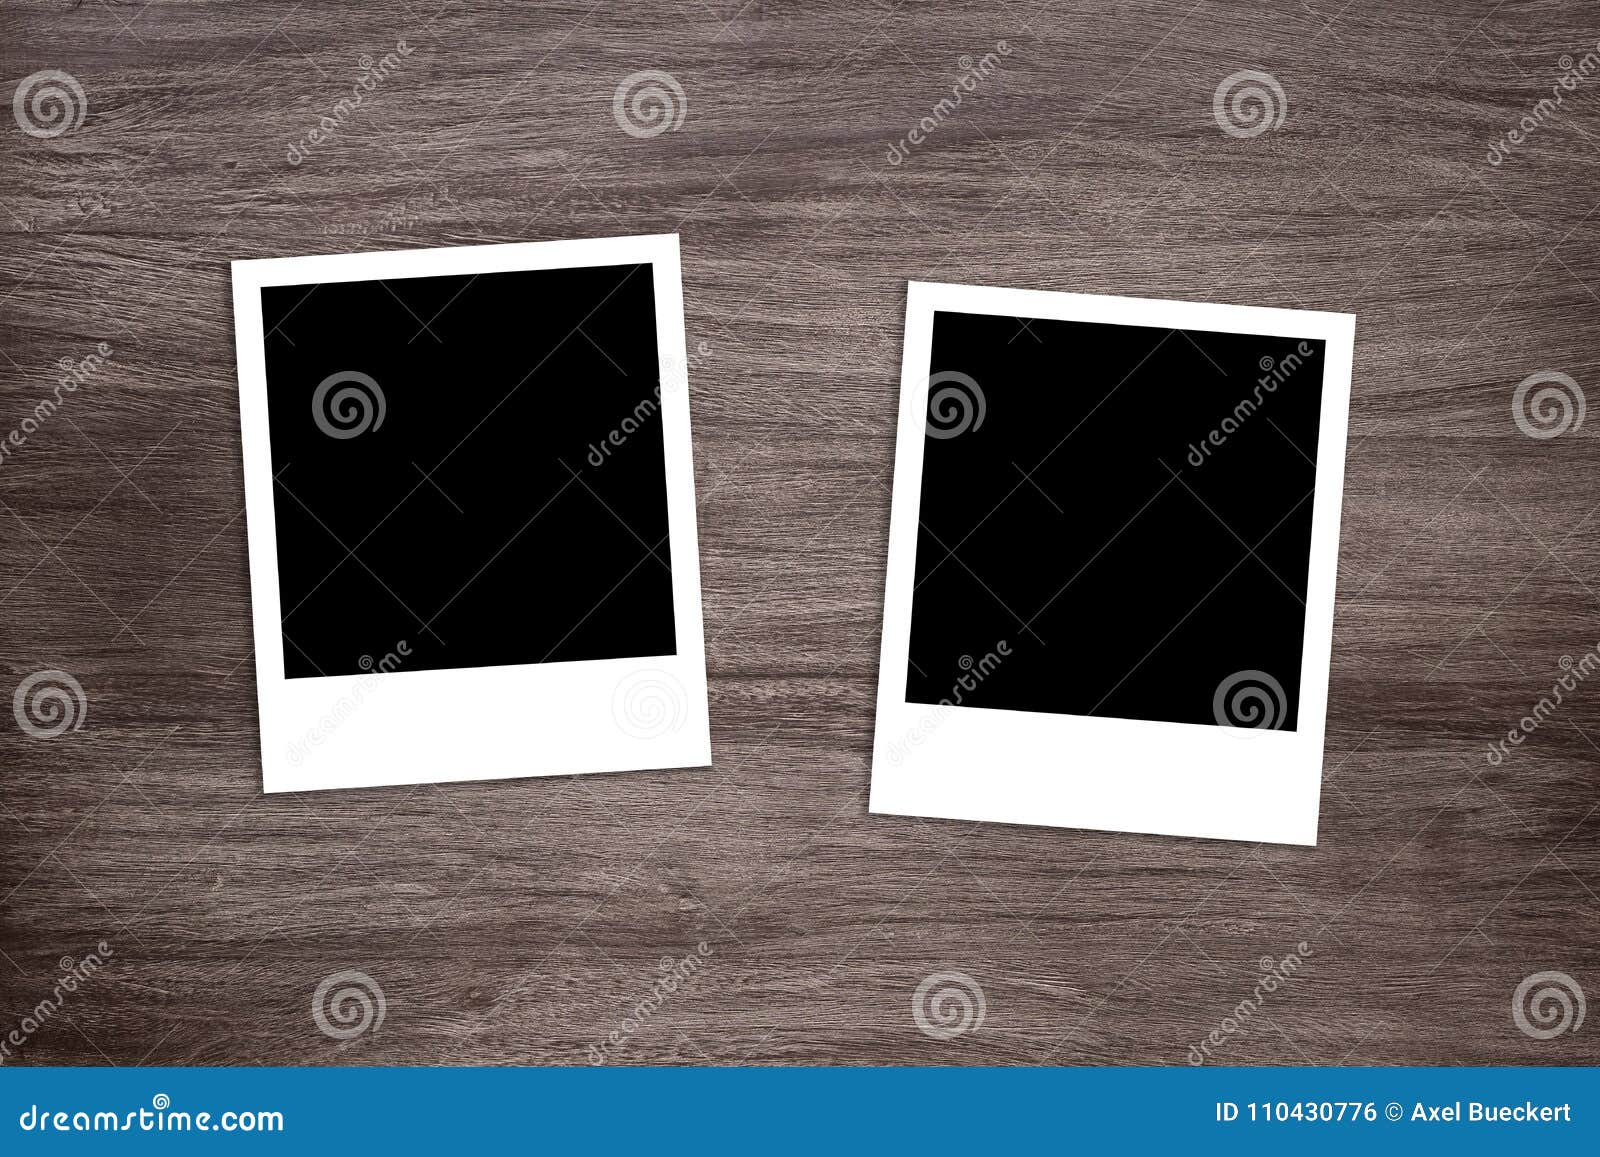 two blackened instant photo print templates on wooden background